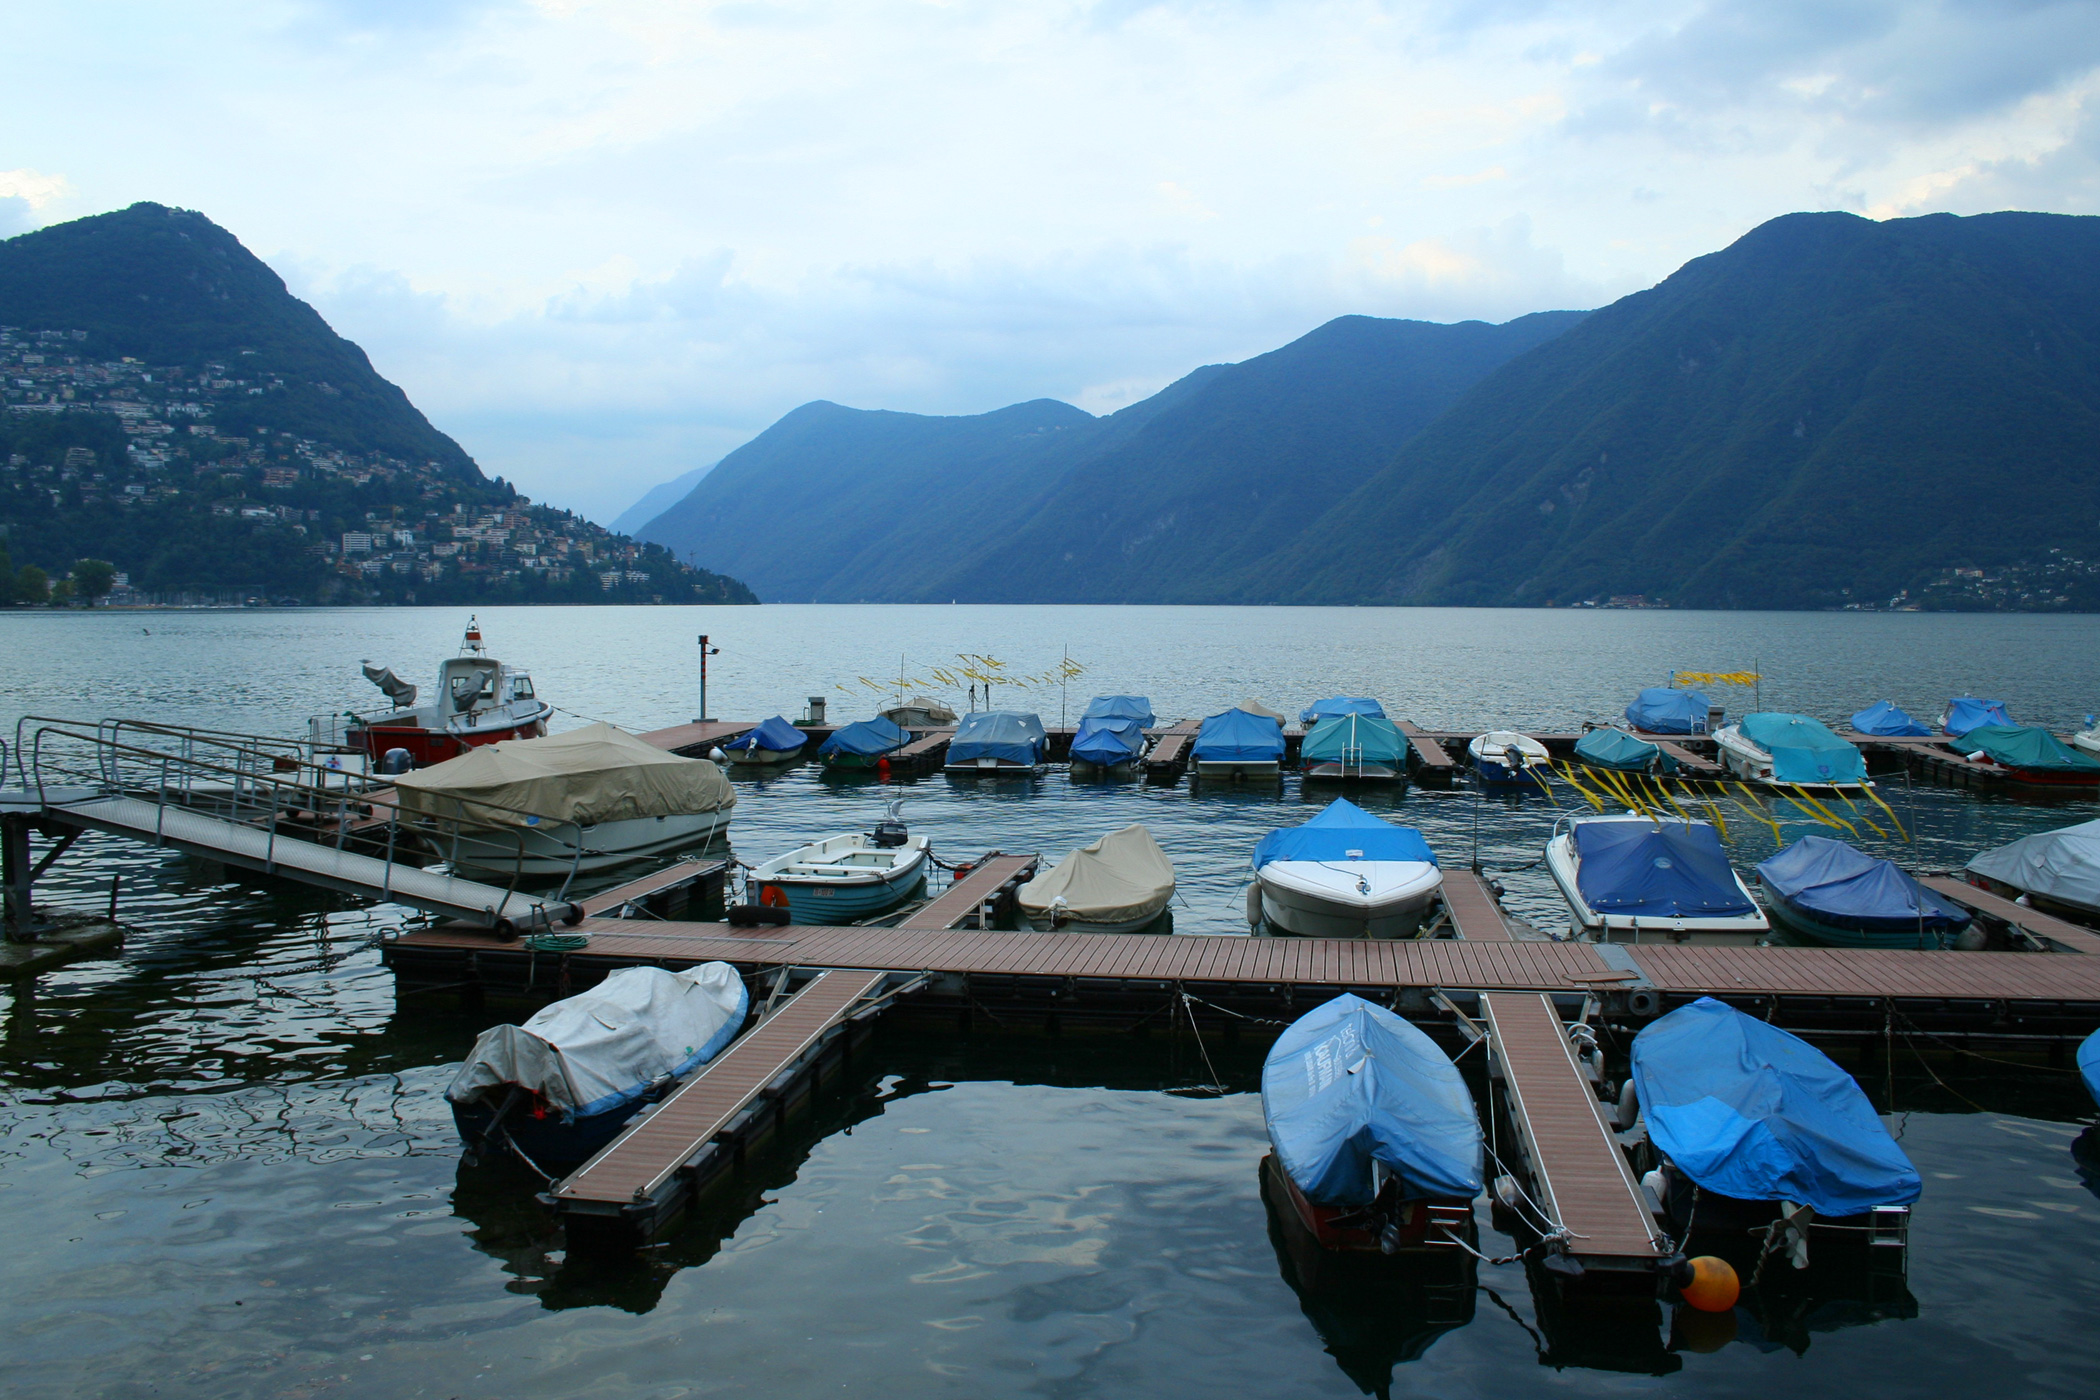 Small boats on a lake in Italy